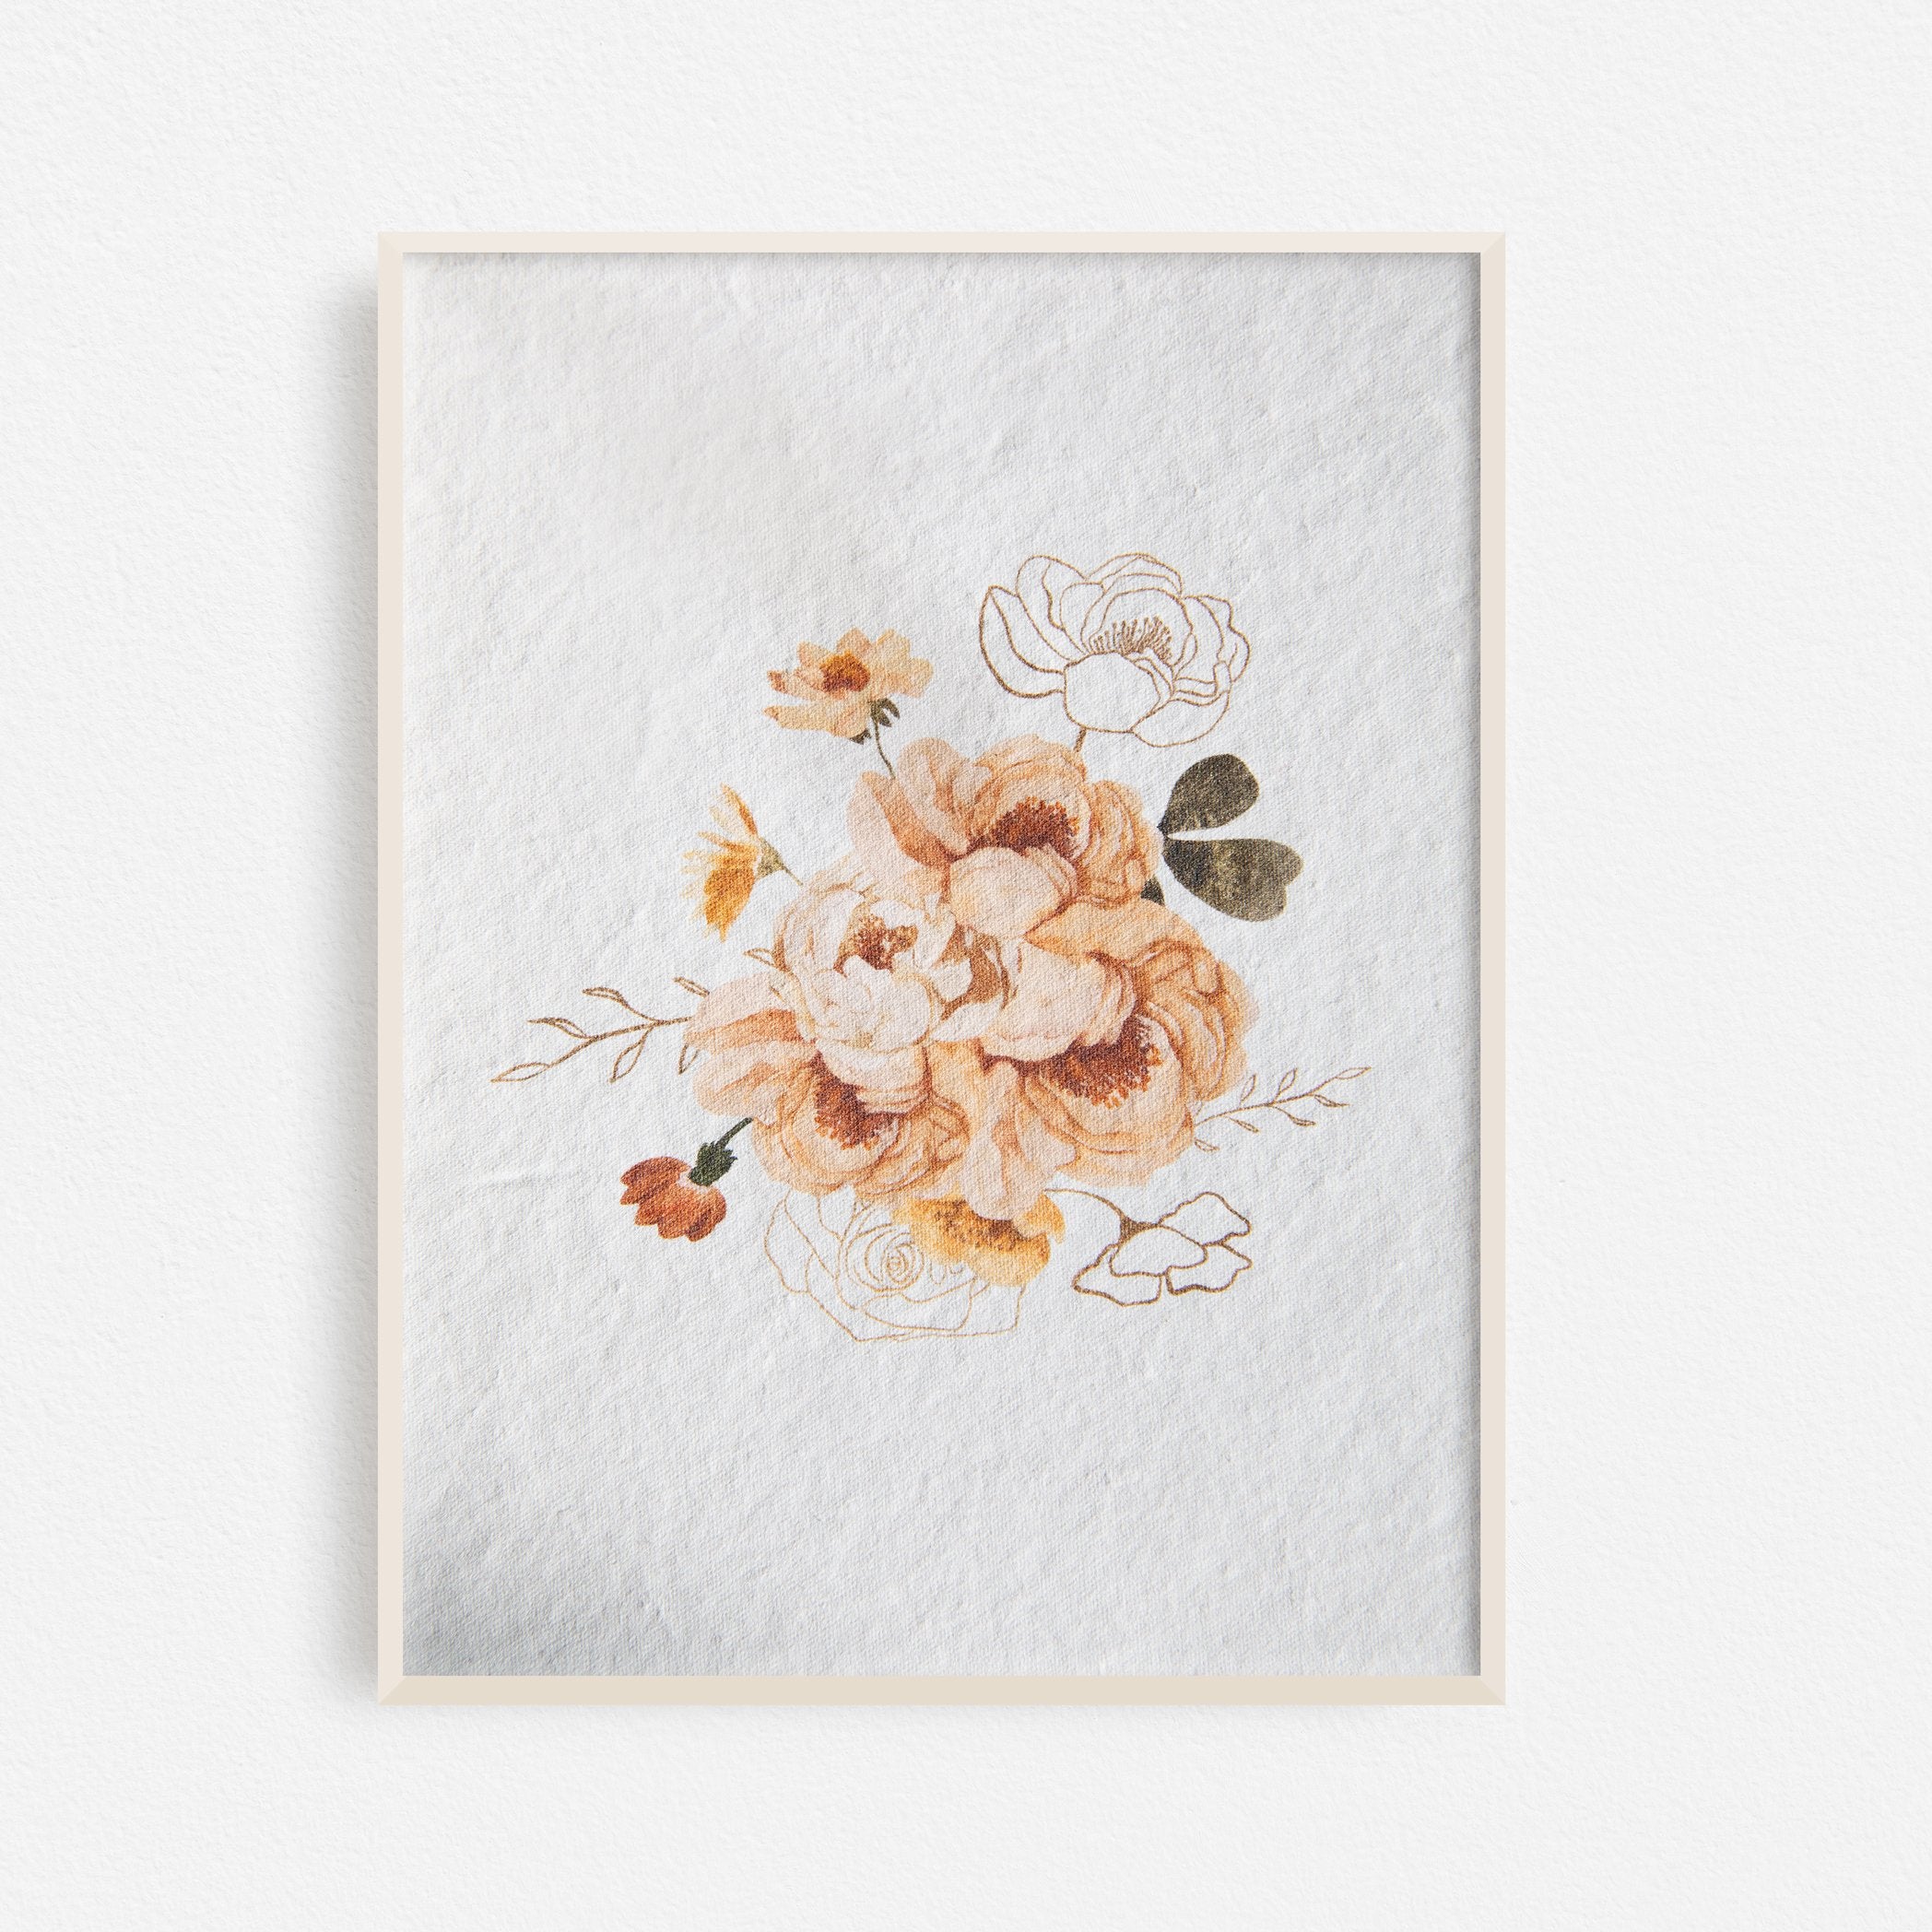 Autumn Flowers Bouquet Art Print No.1 - Feathers and Stone